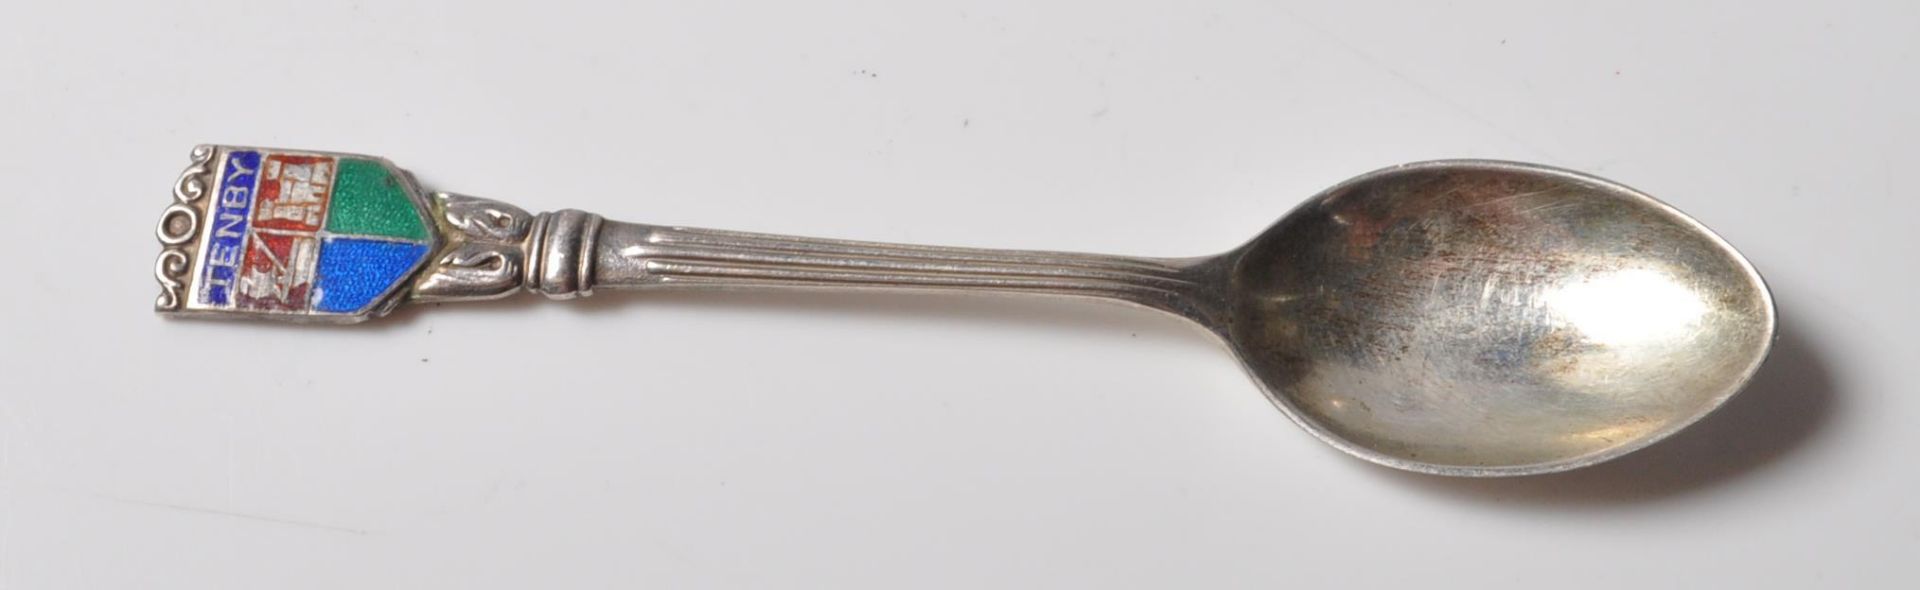 COLLECTION OF VINTAGE 20TH CENTURY SILVERWARE - Image 7 of 8